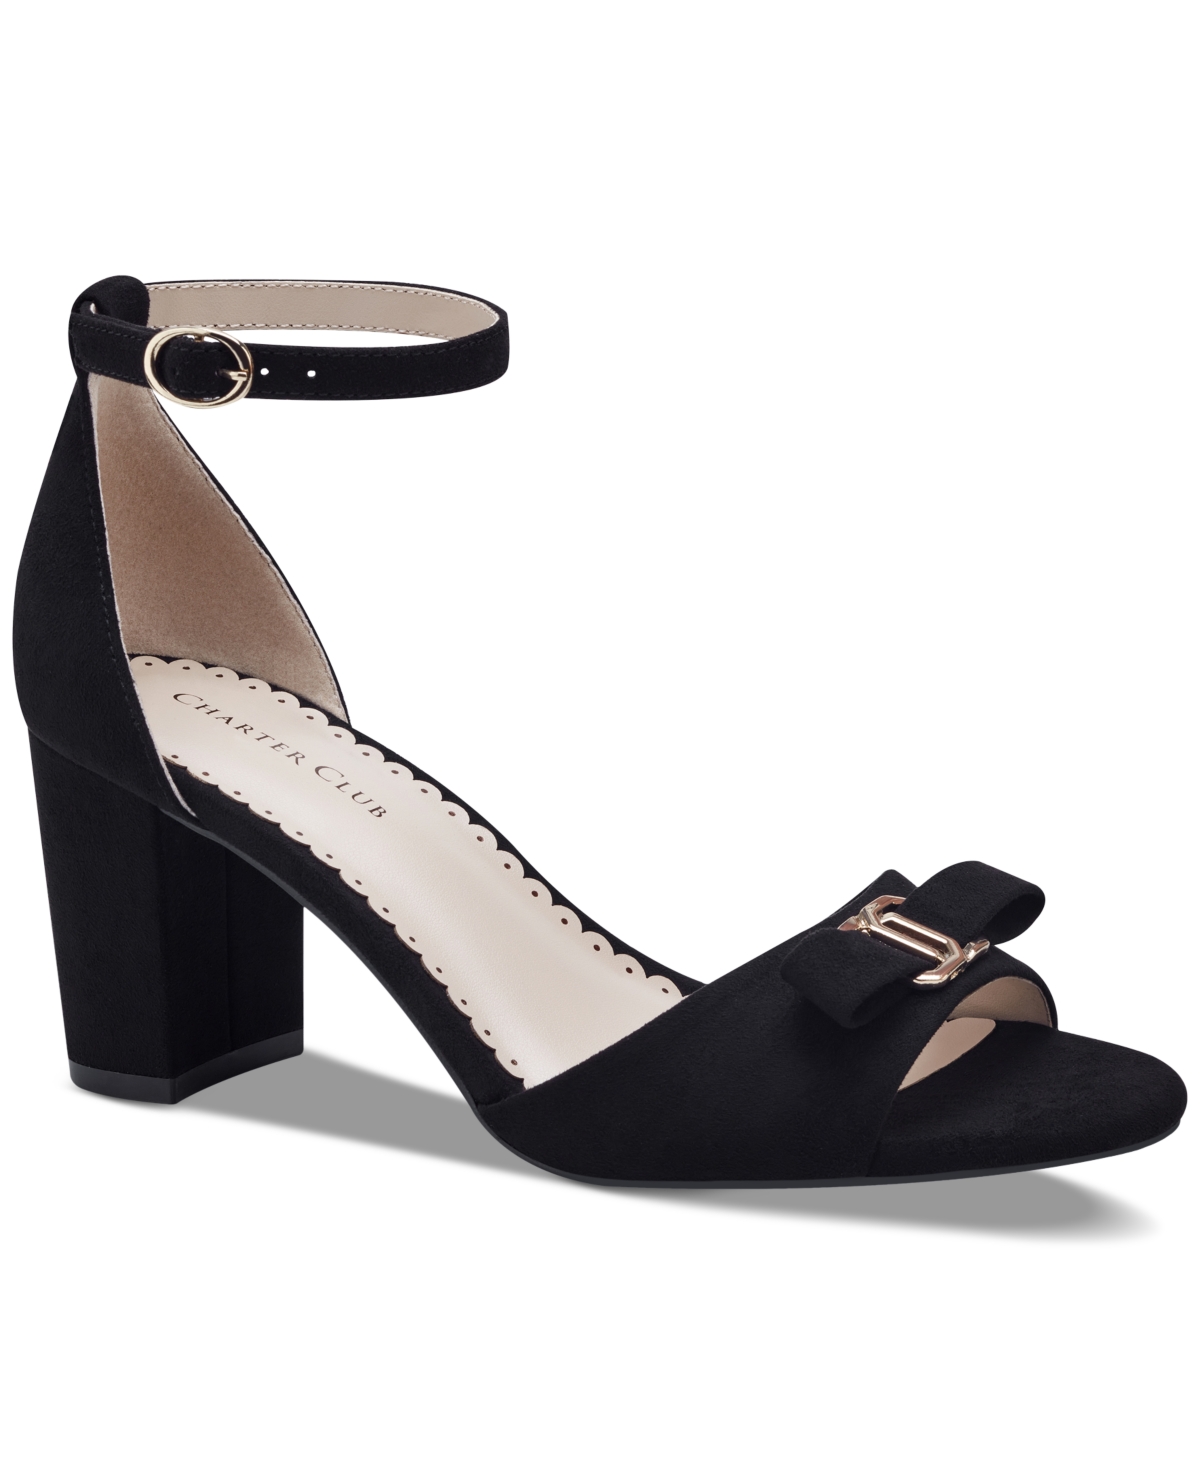 Women's Lilianna Ankle-Strap Dress Sandals, Created for Macy's - Black